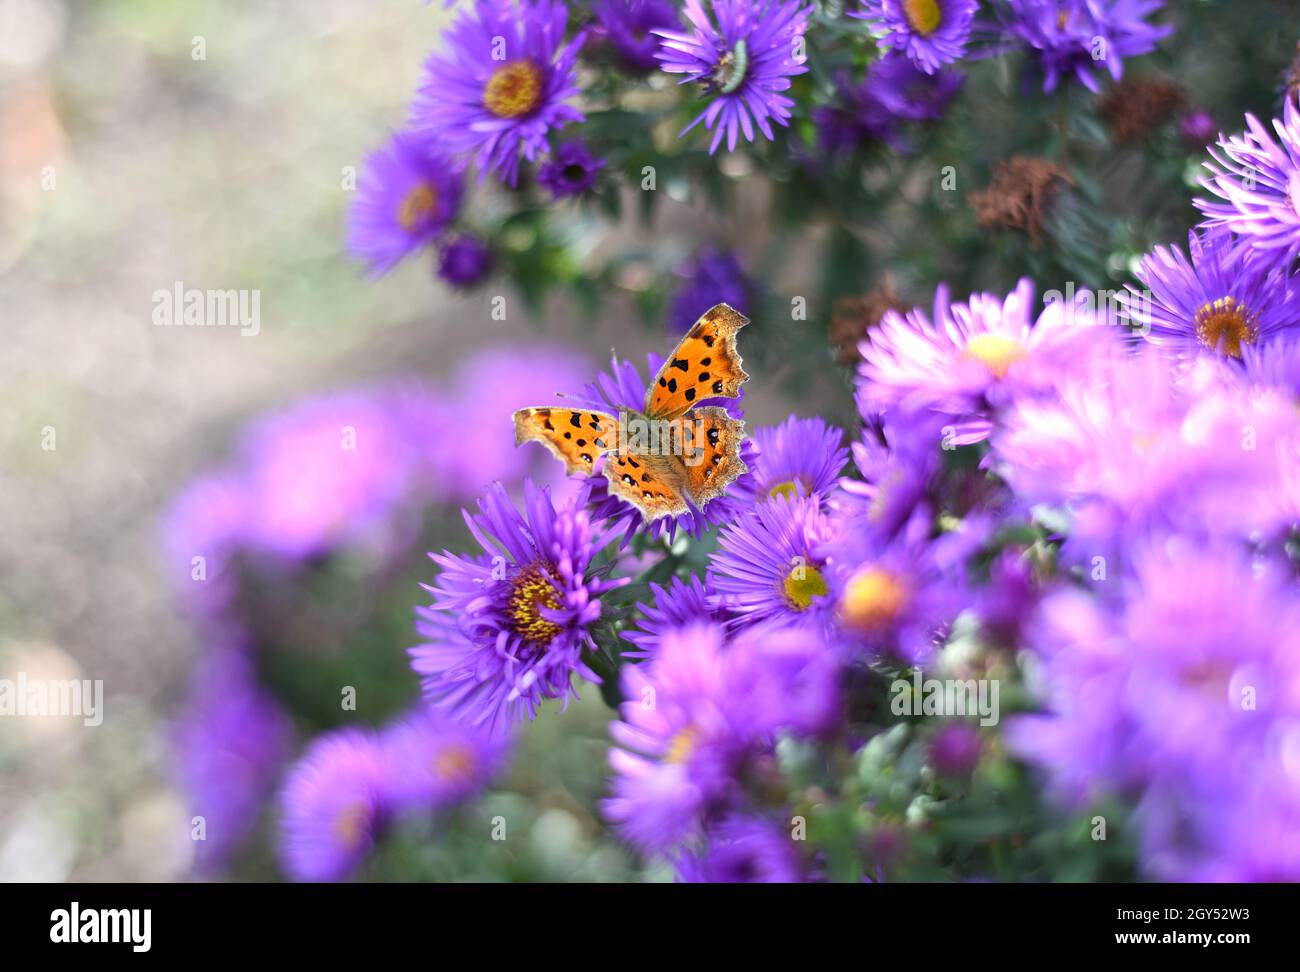 The Comma or Polygonia c-album butterfly on Japanese aster (Kalimeris incisa) Stock Photo